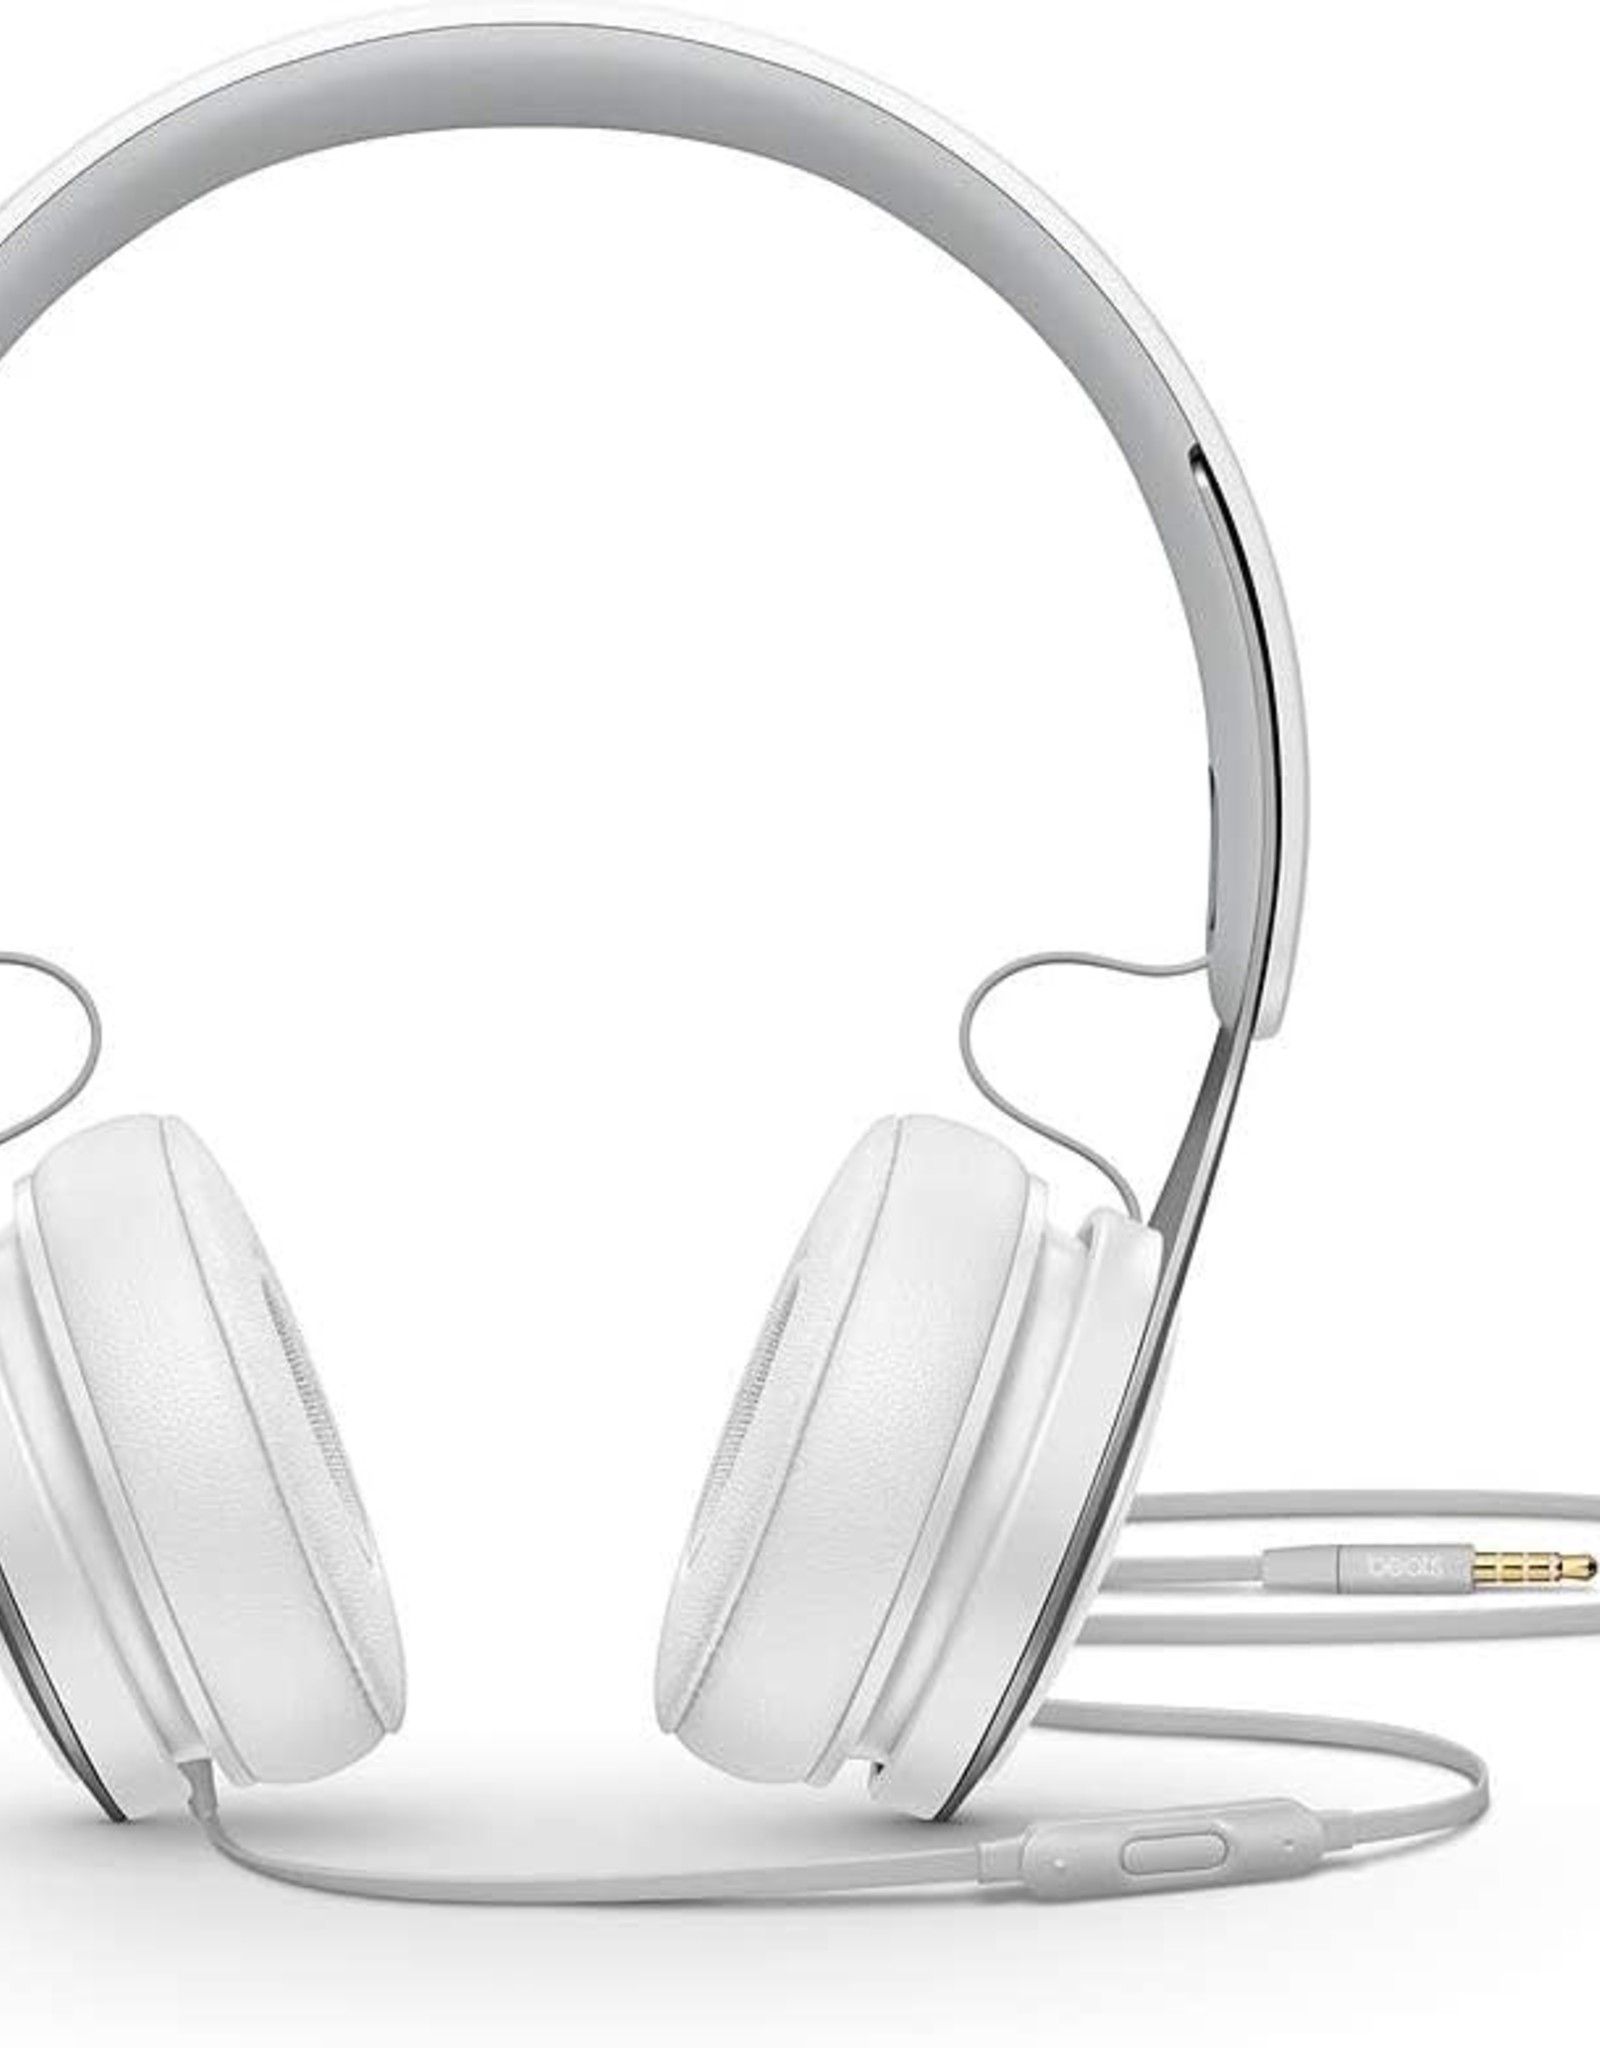 Beats EP Wired On-Ear Headphones - Battery Free for Unlimited Listening, Built in Mic and Controls - White